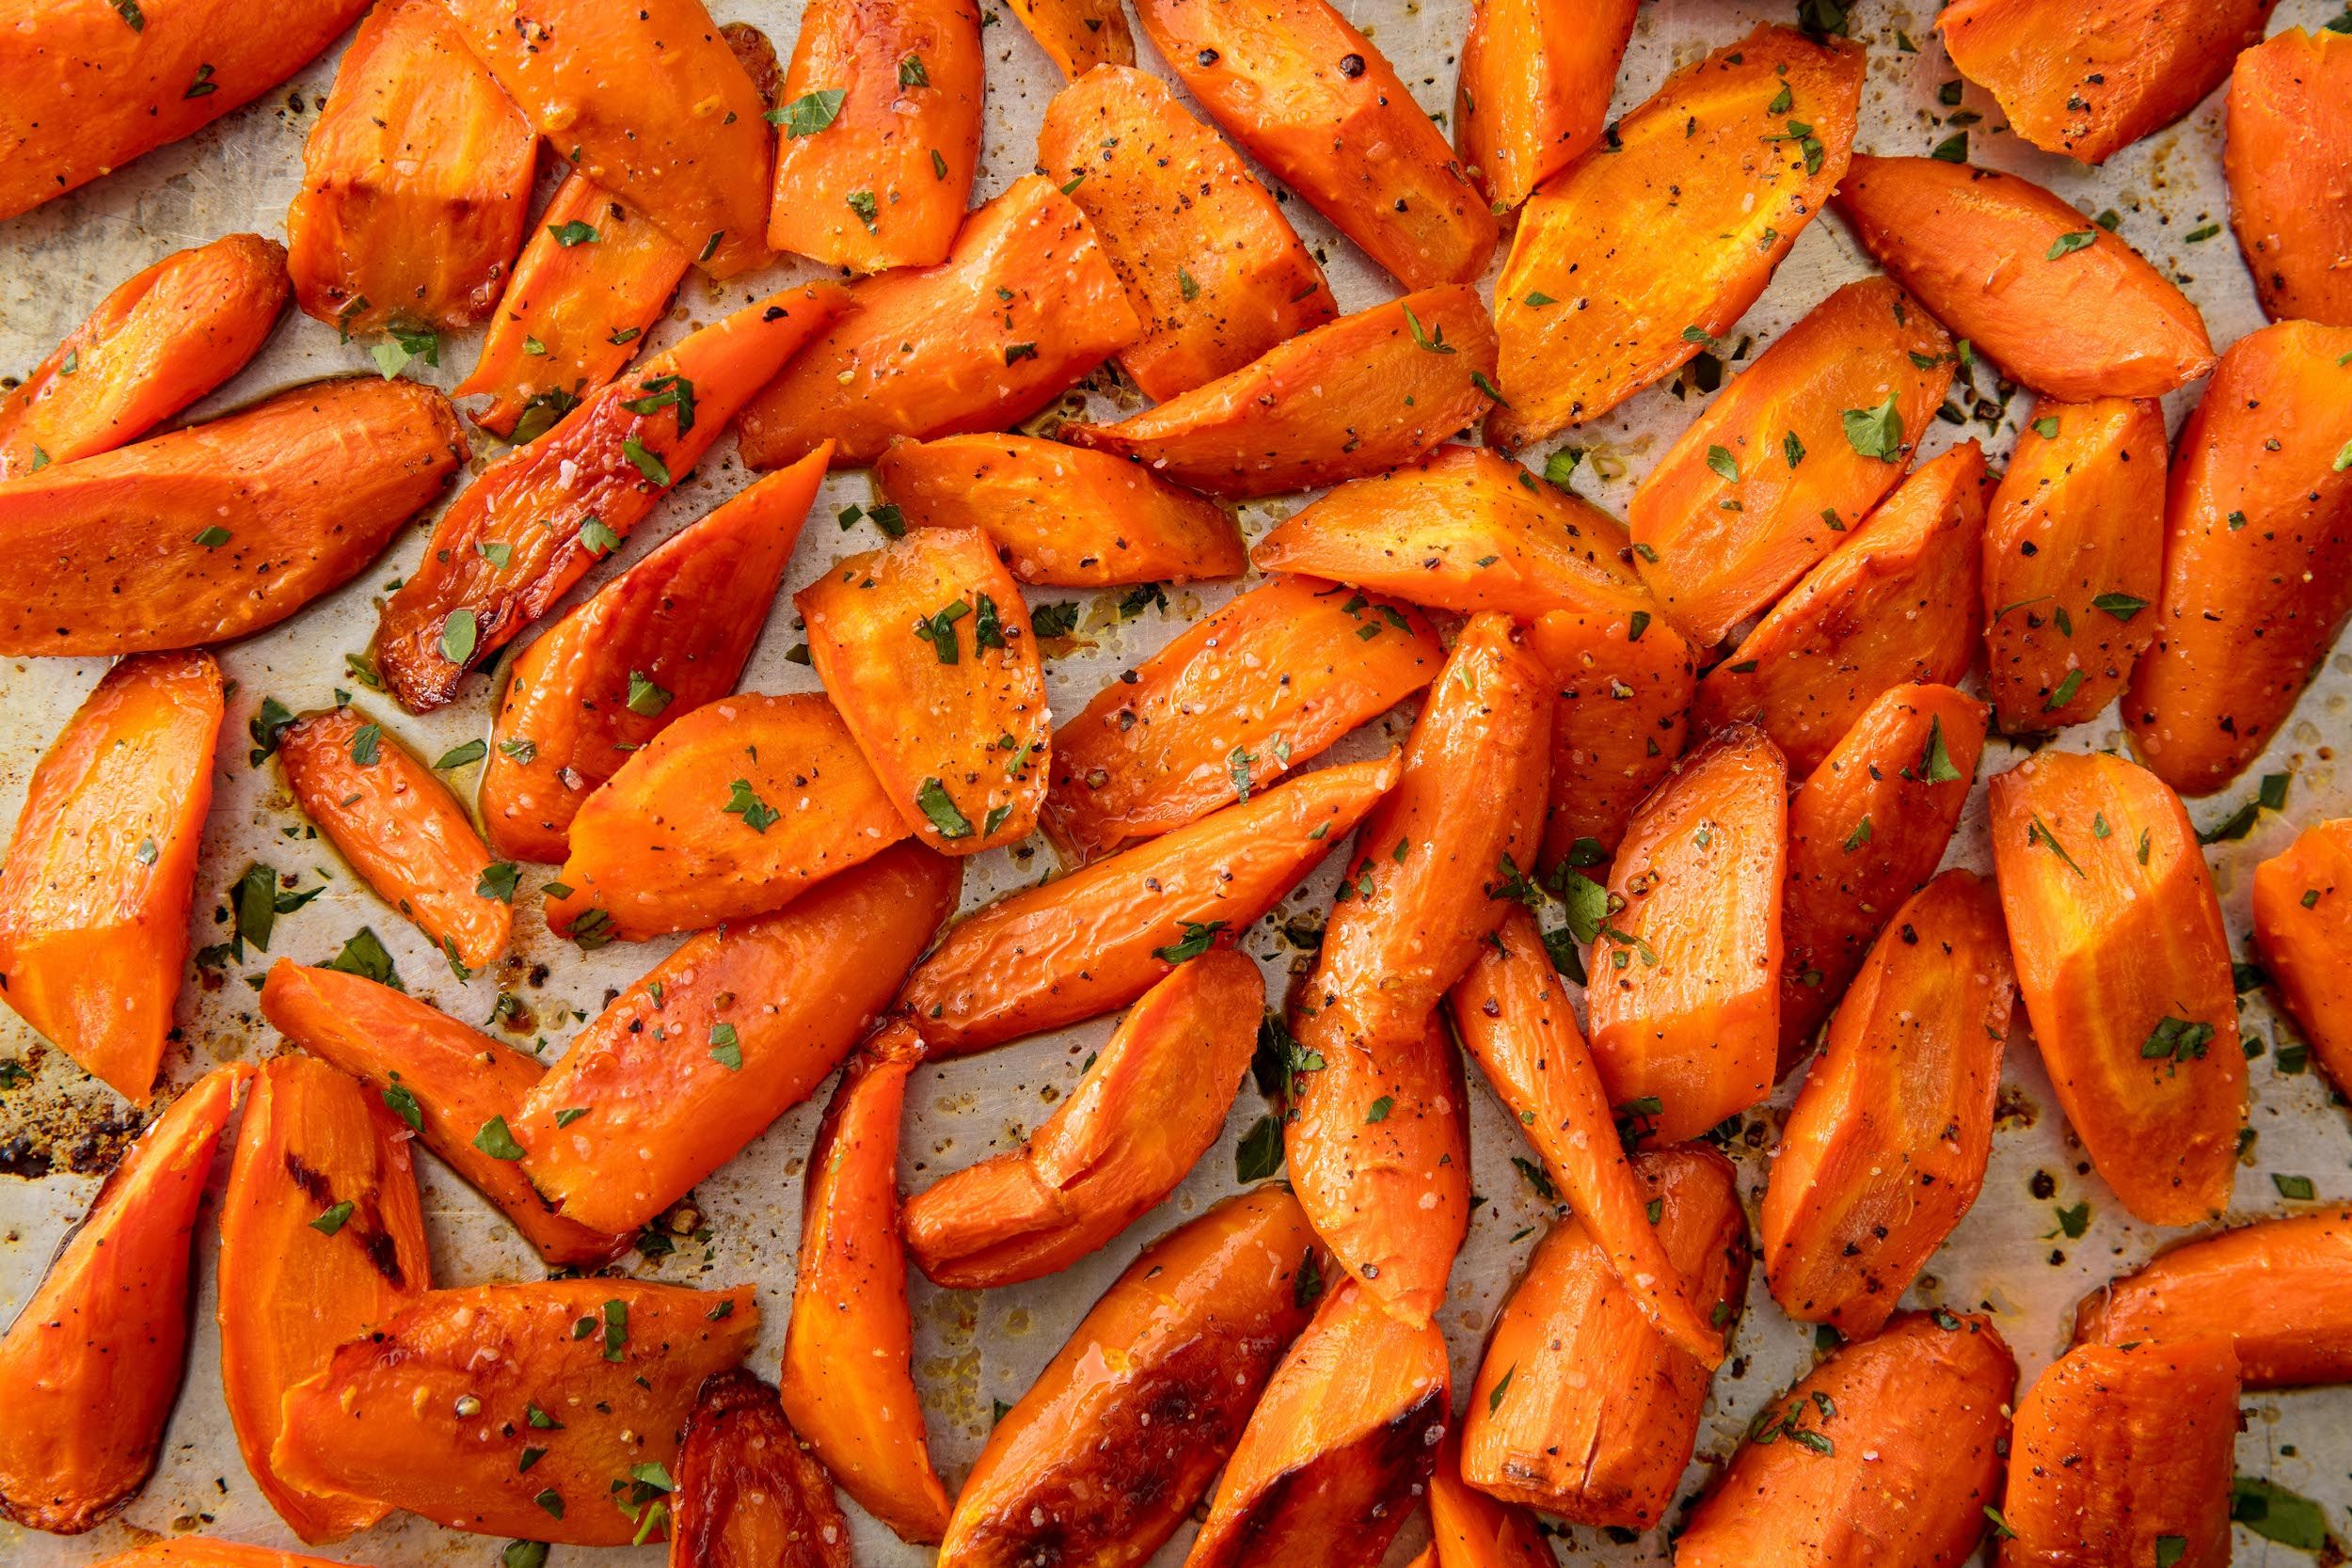 Roasted Carrots Recipe - How To Make Oven-Roasted Carrots